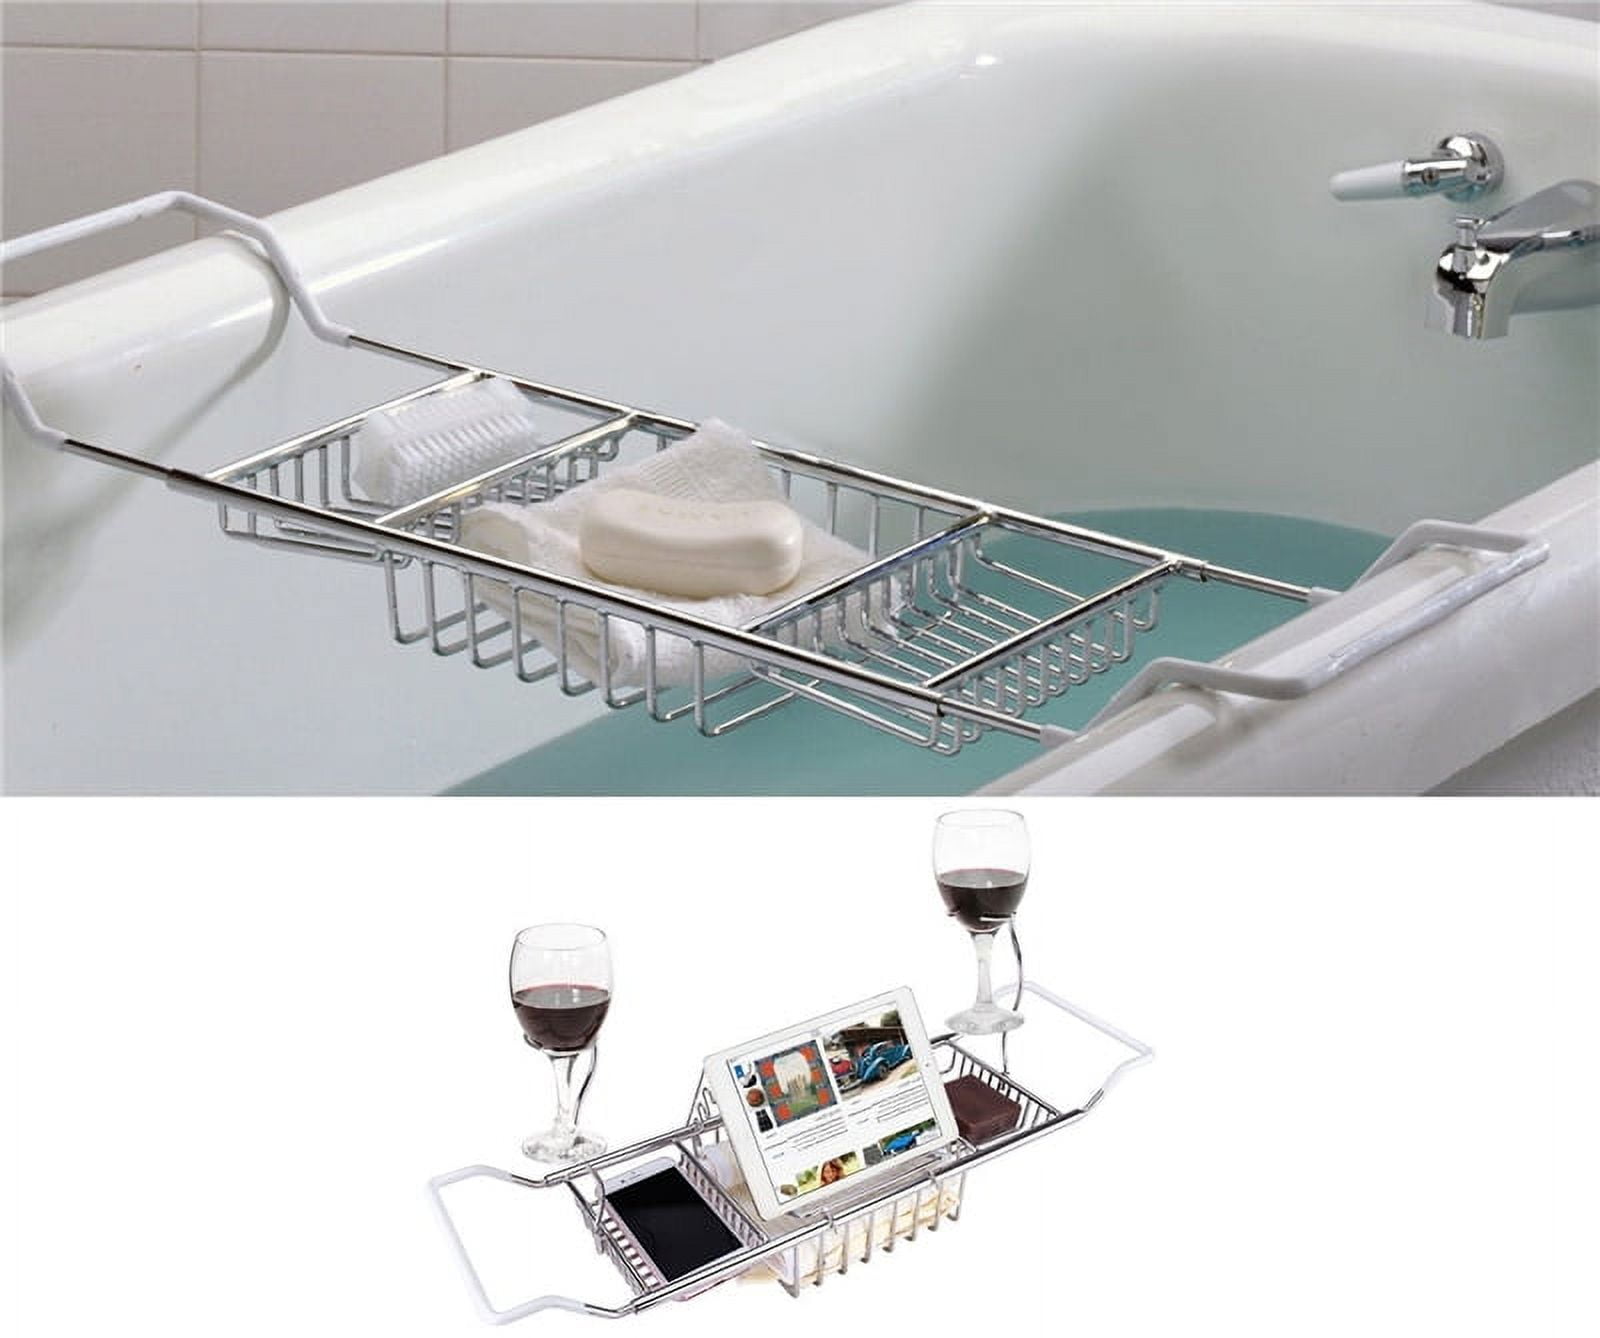 Knifun Bath Tub Caddy Over Bathtub Tray Stainless Steel Racks Organizer  with Adjustable 24.4 -33.46in Extending Bars, Wine Glass and Universal Cup  Holder, Book Rack 